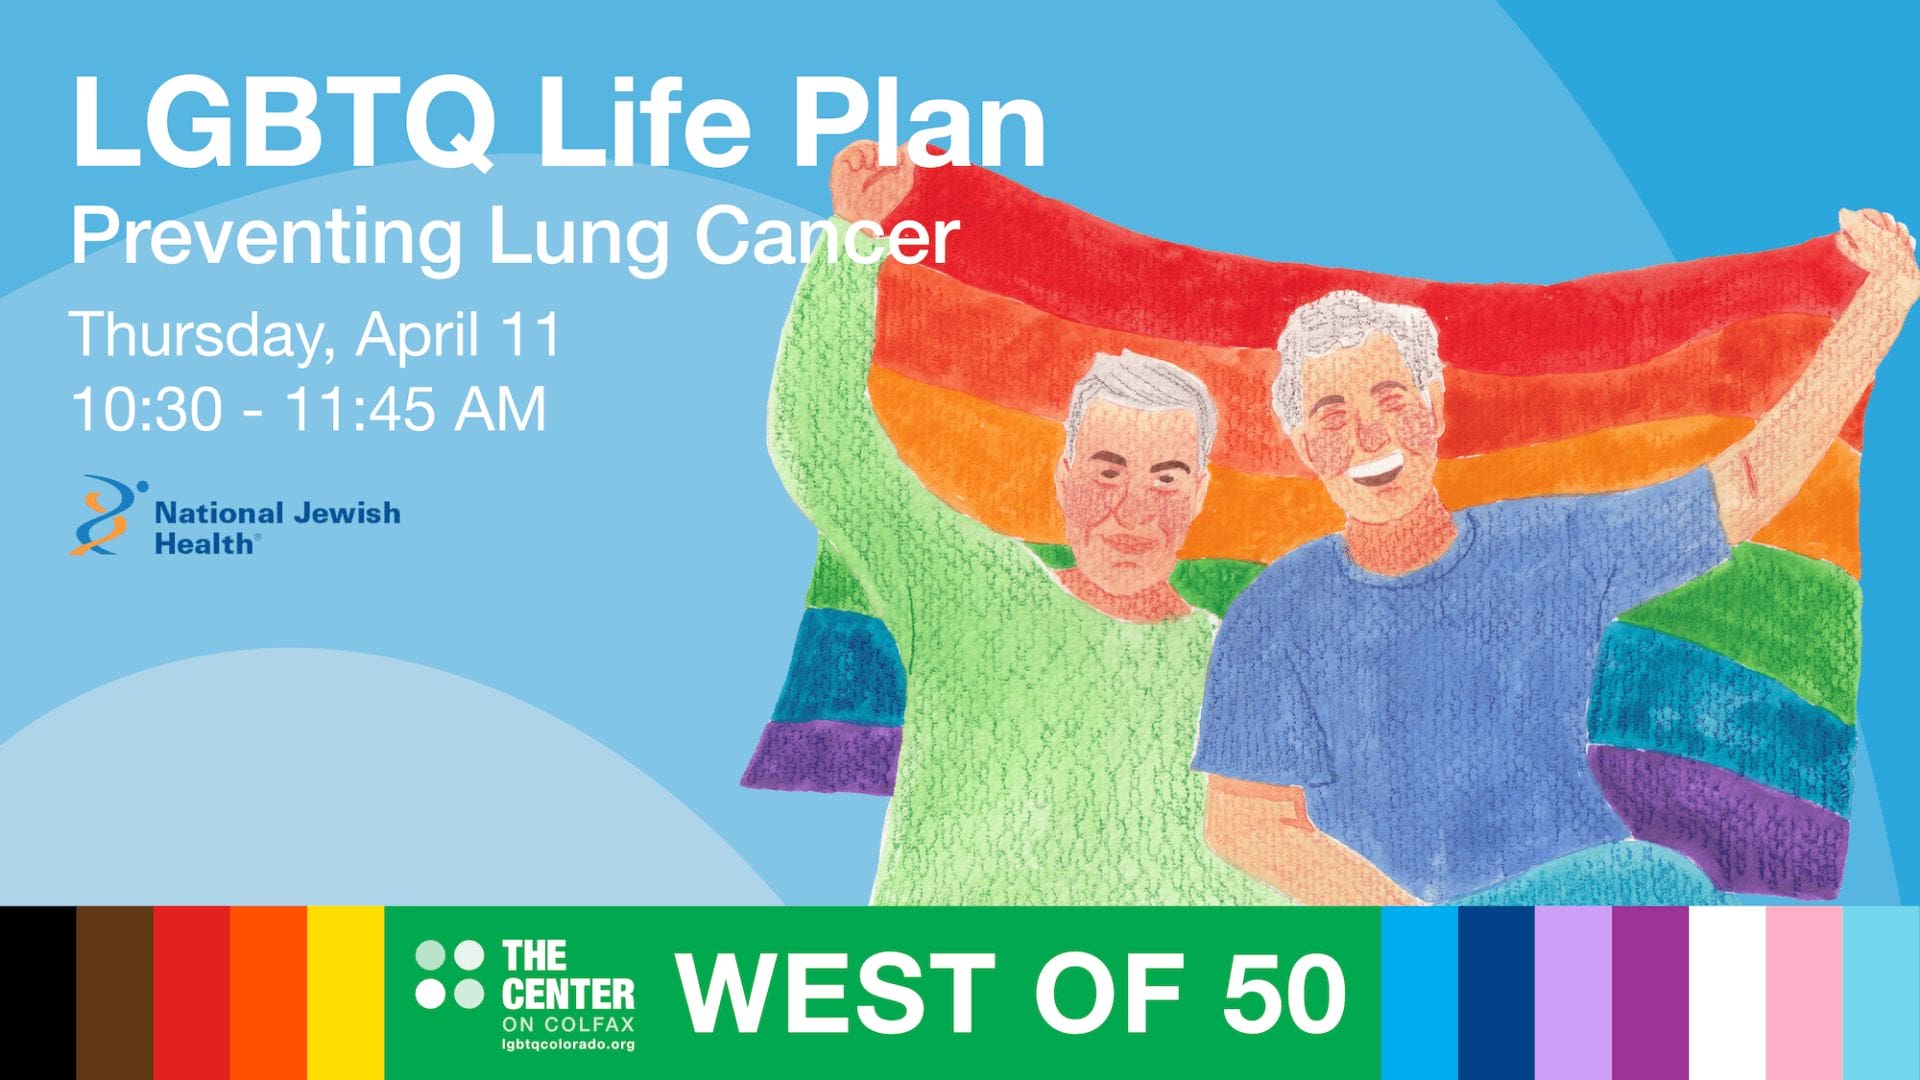 LGBTQ Life Plan: Preventing Lung Cancer